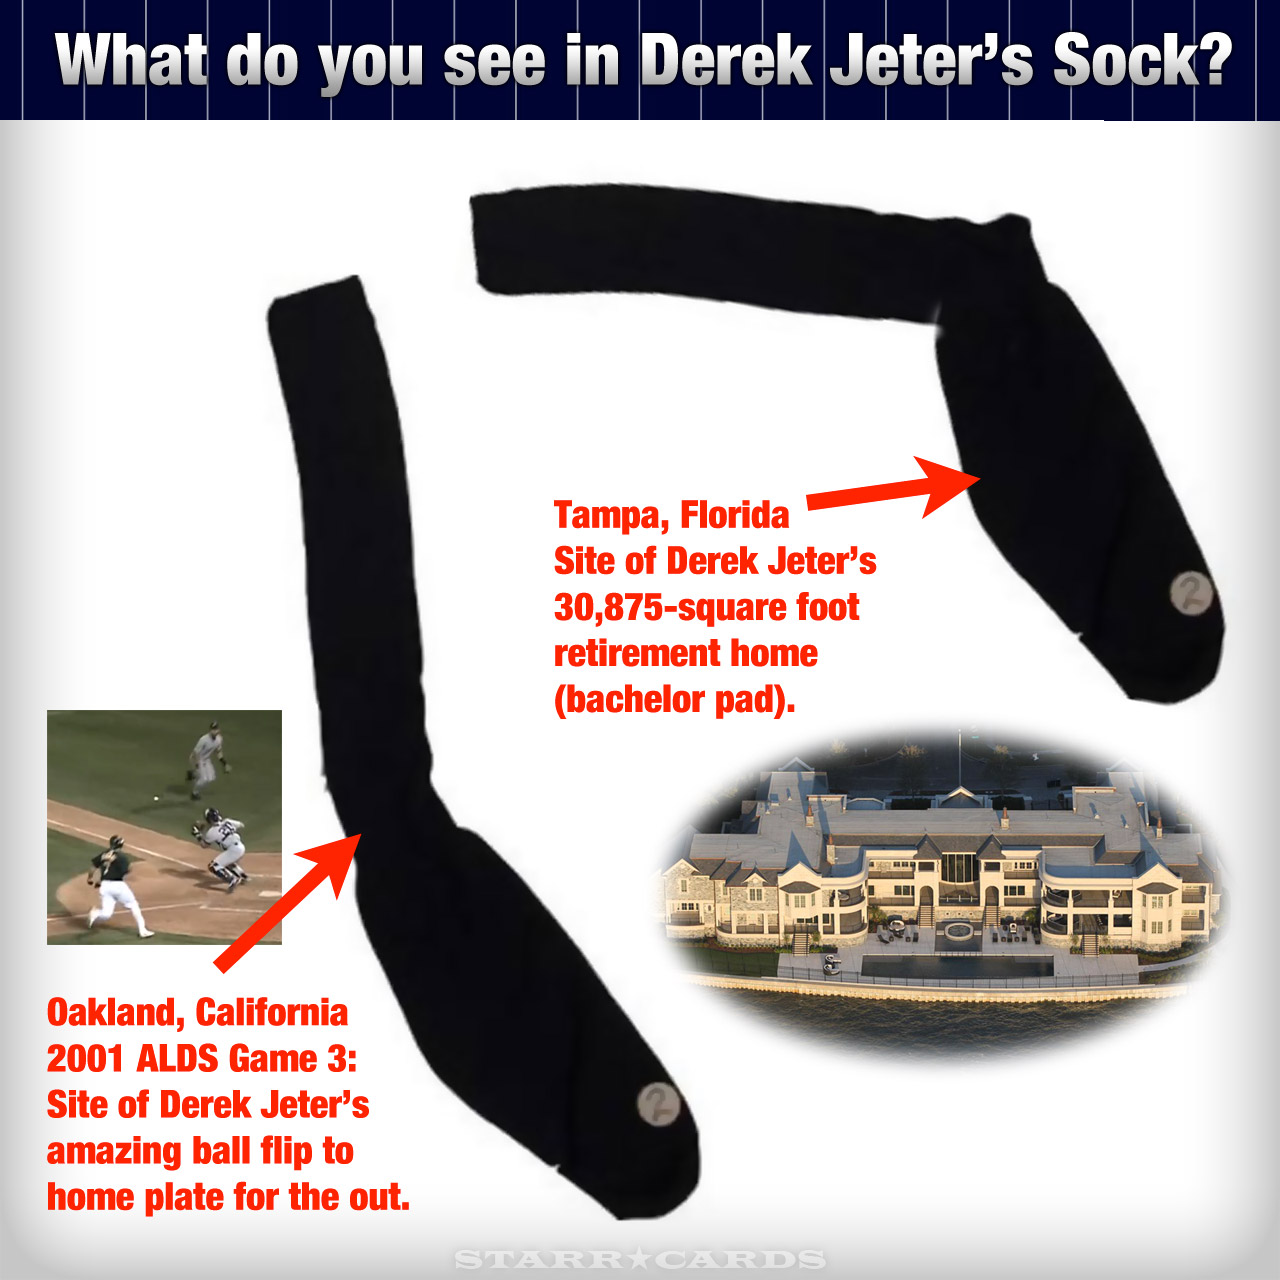 Rorschach test: What do you see in Derek Jeter's sock?